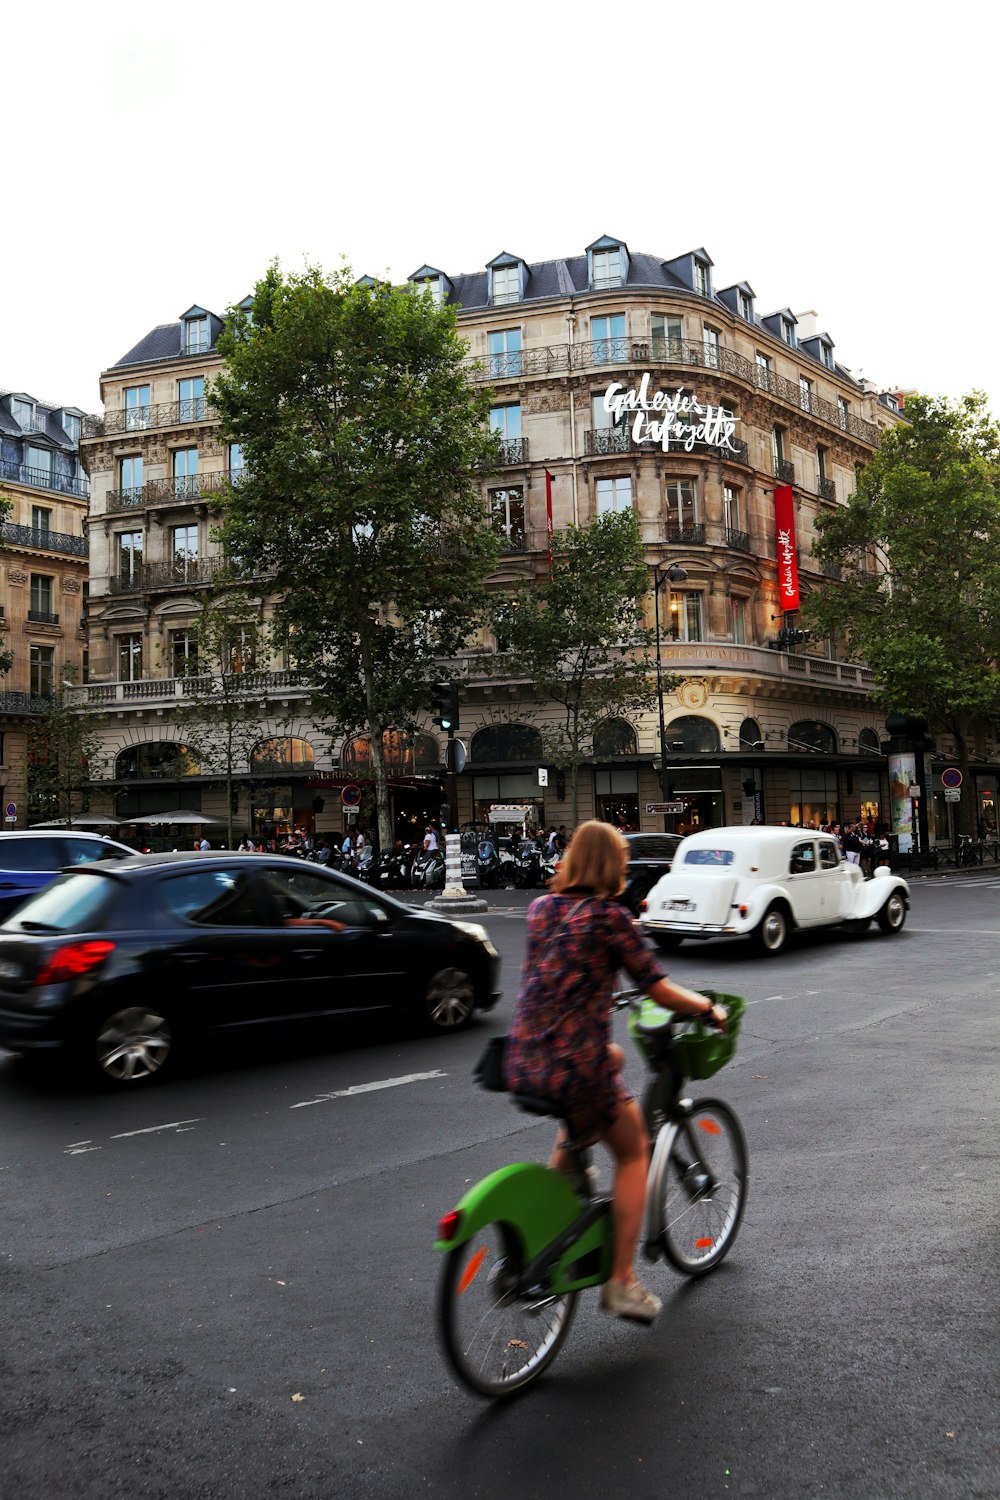 a person riding a bicycle on a street with cars and buildings in the background